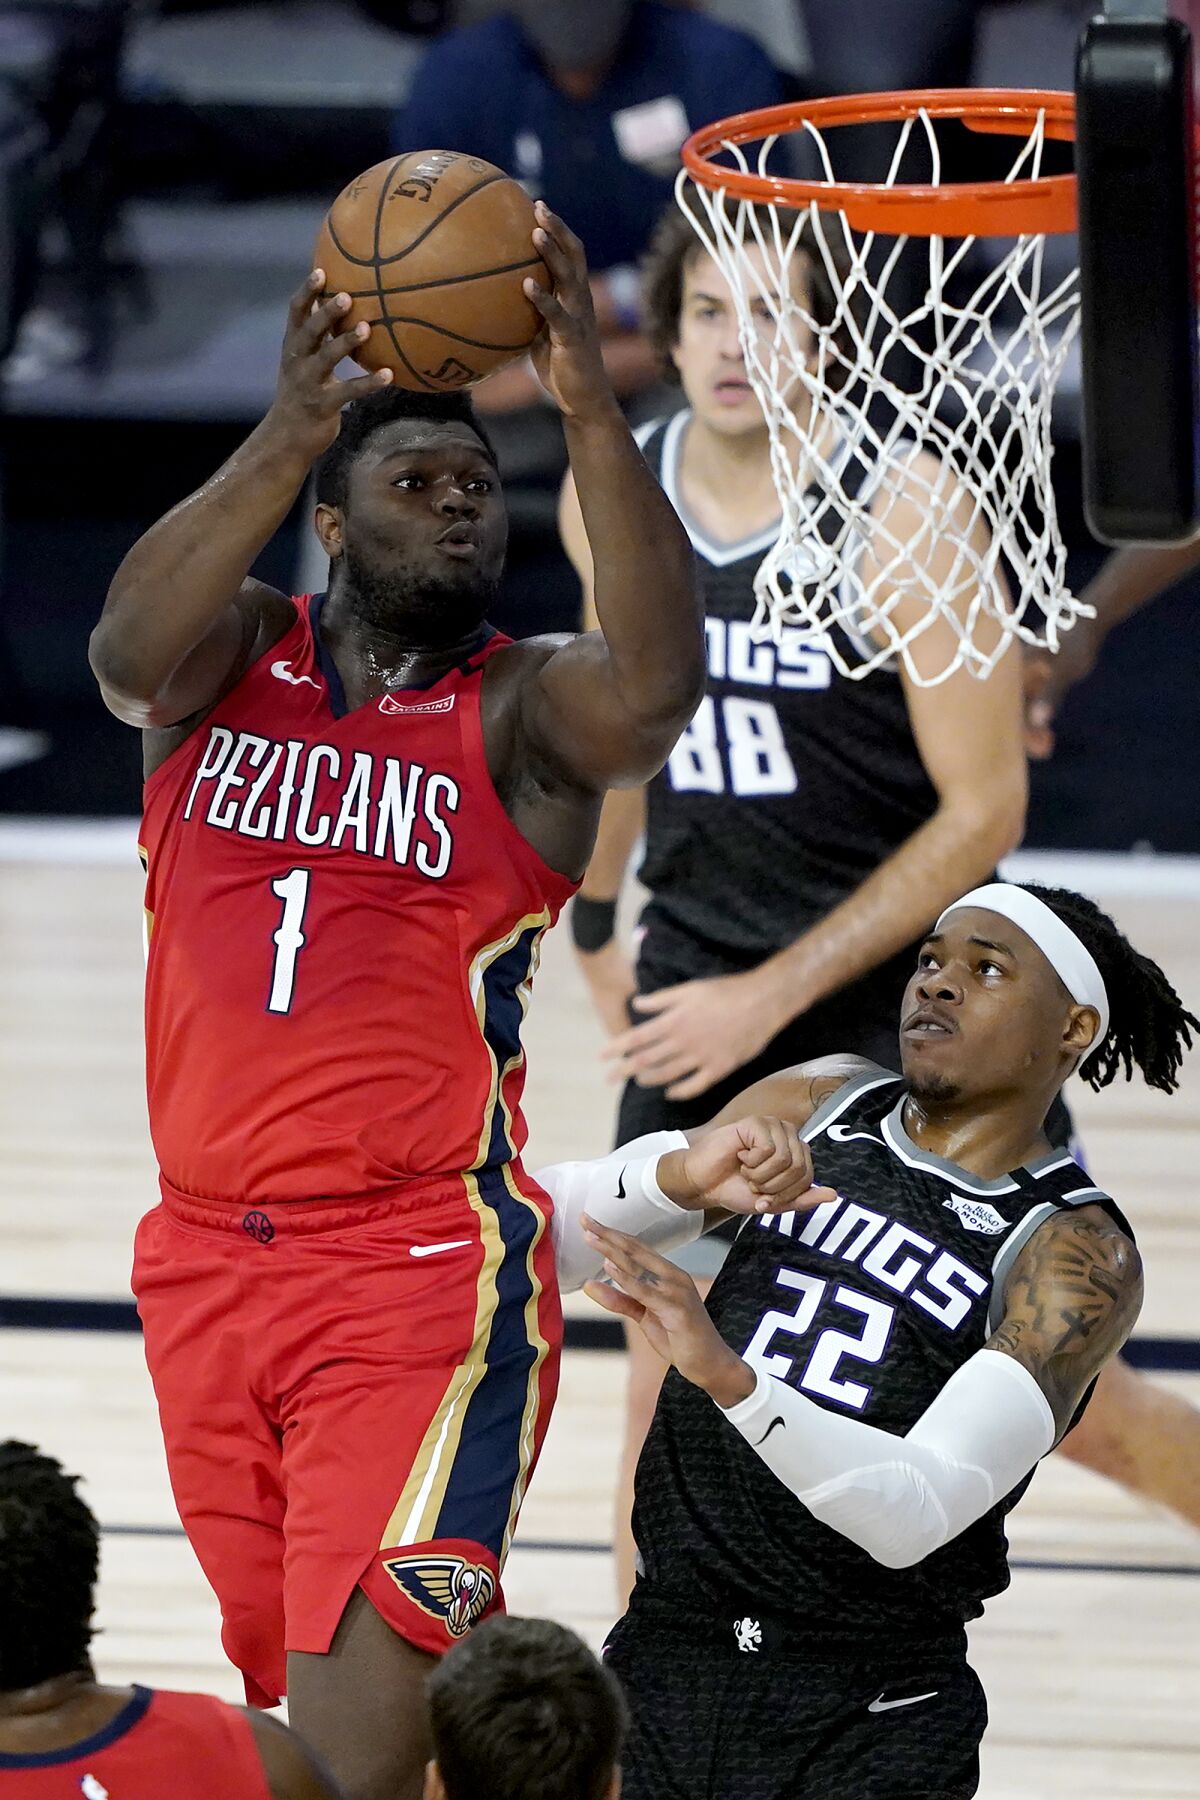 New Orleans Pelicans' Zion Williamson (1) goes up for a shot against Sacramento Kings' Richaun Holmes (22) during the first half of an NBA basketball game Thursday, Aug. 6, 2020 in Lake Buena Vista, Fla. (AP Photo/Ashley Landis, Pool)